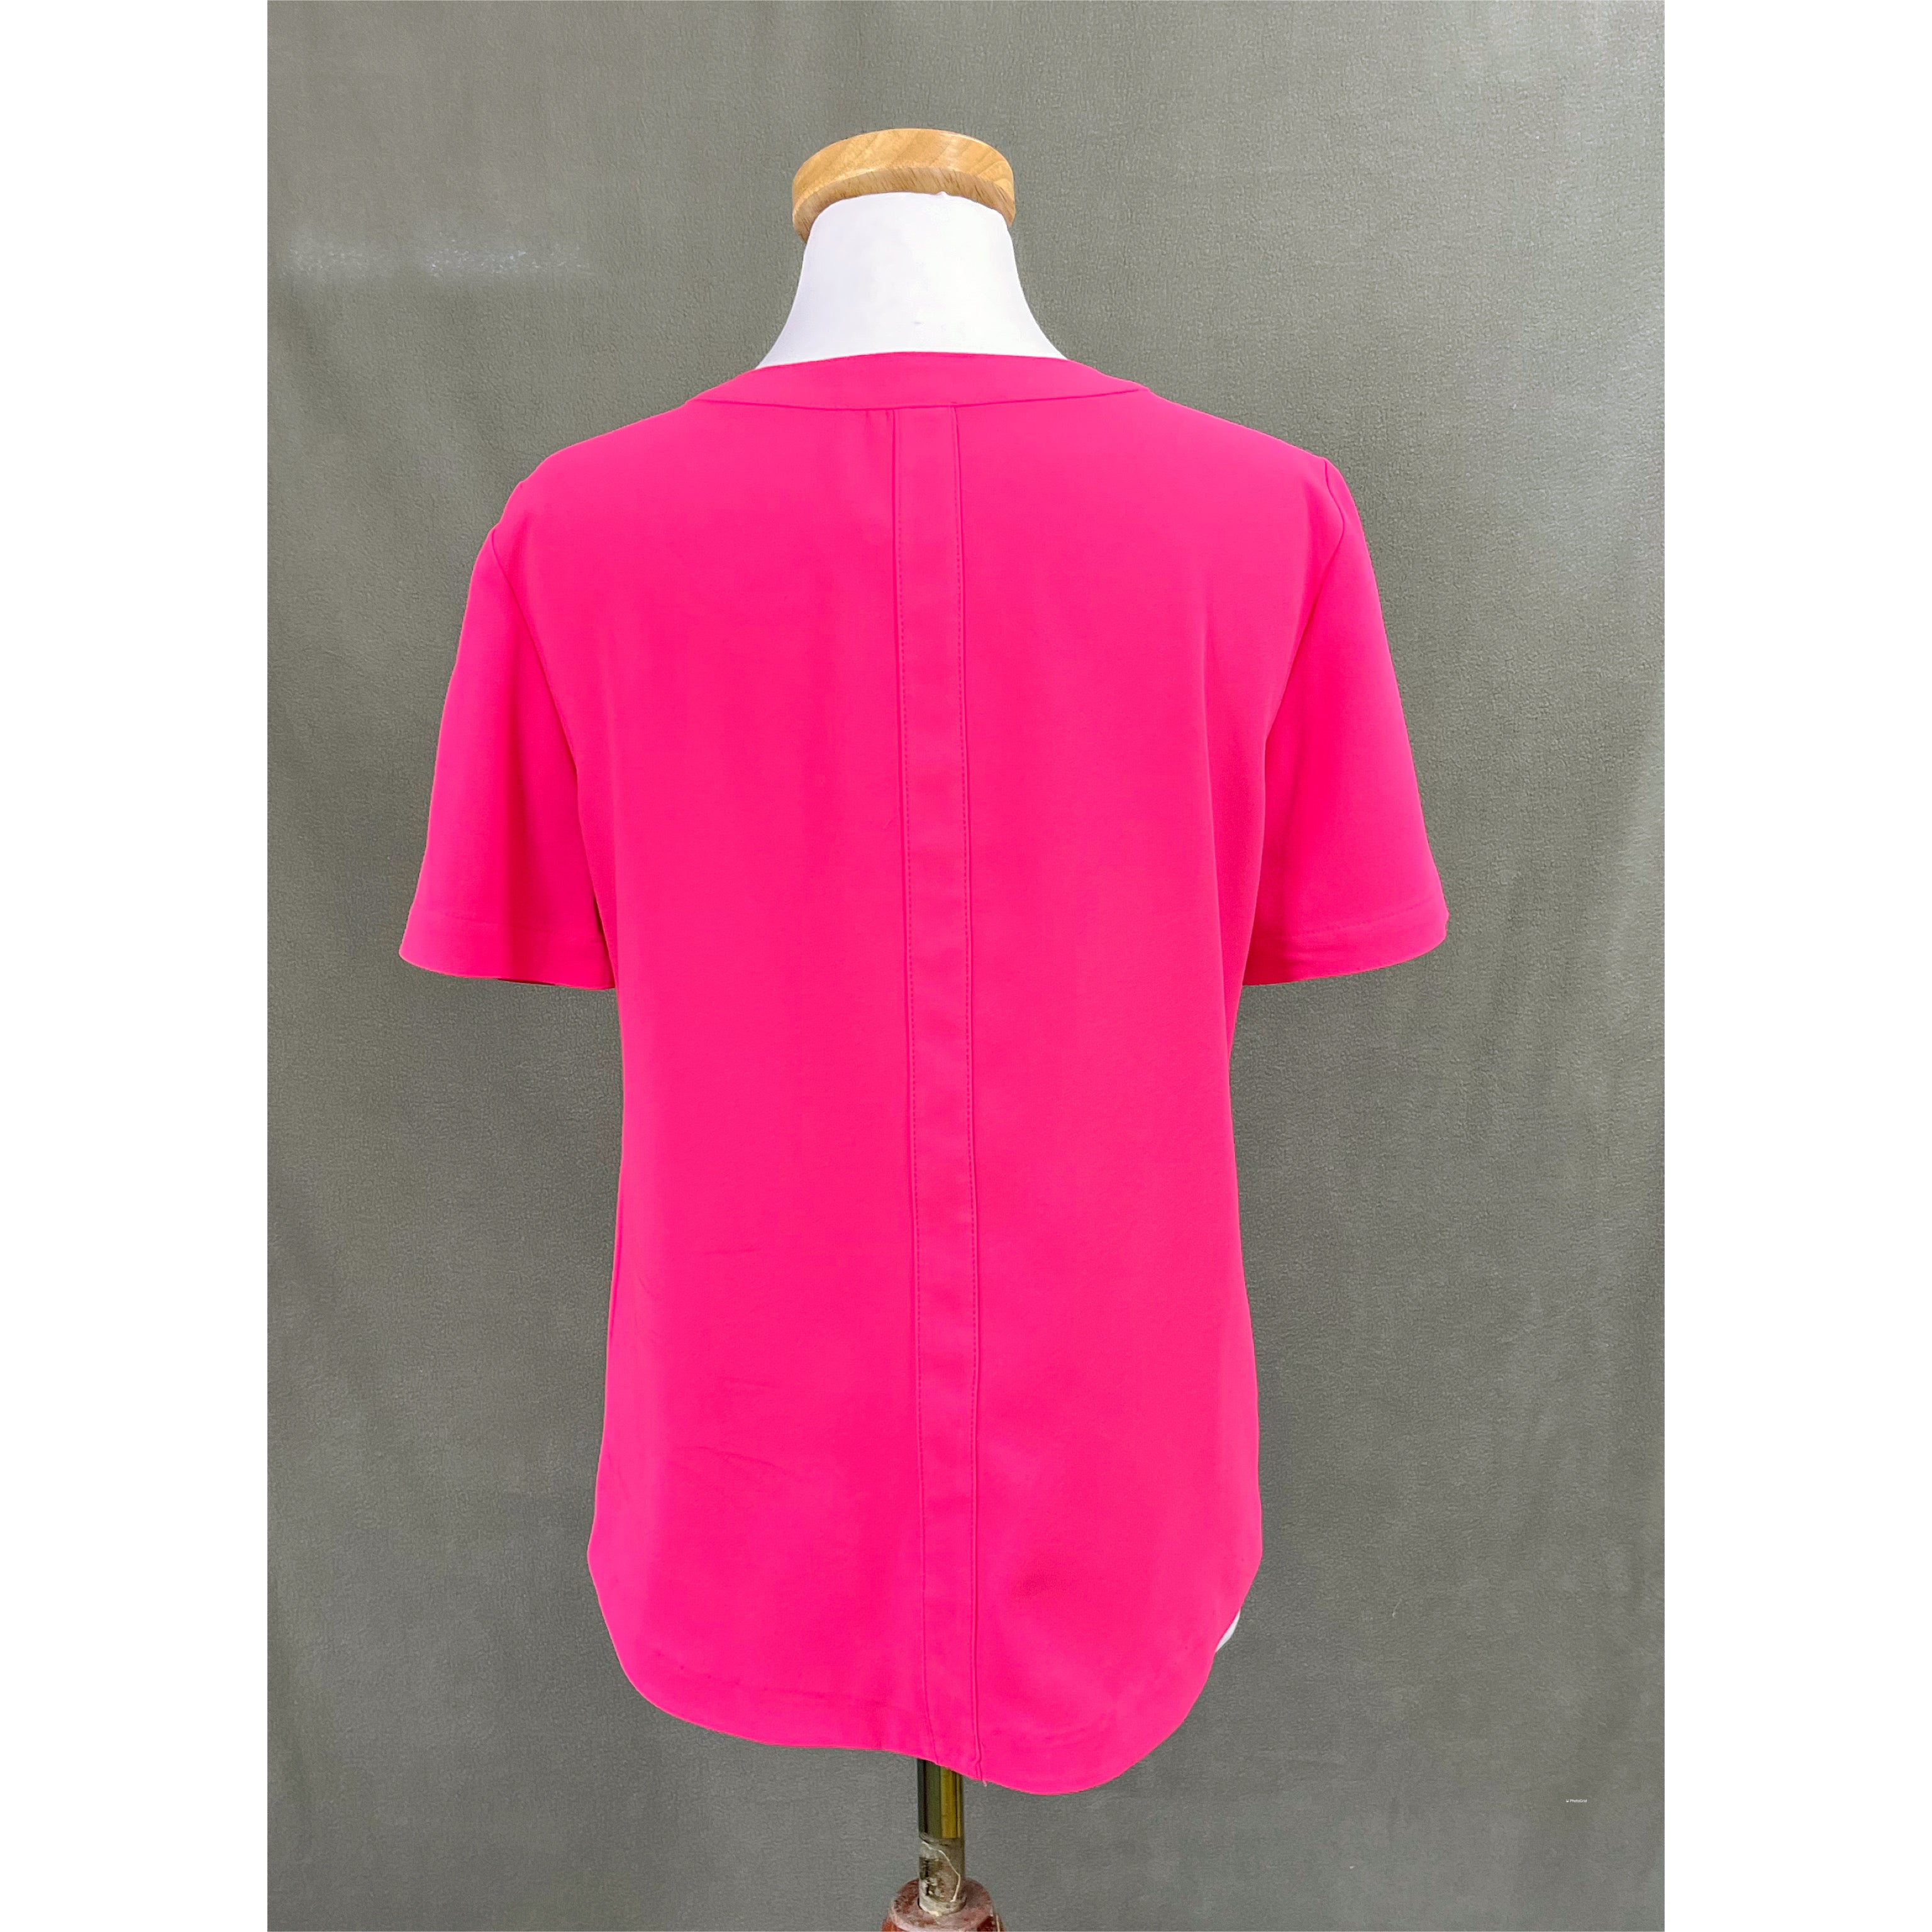 Trina Turk hot pink blouse, size S, NEW WITH TAGS!